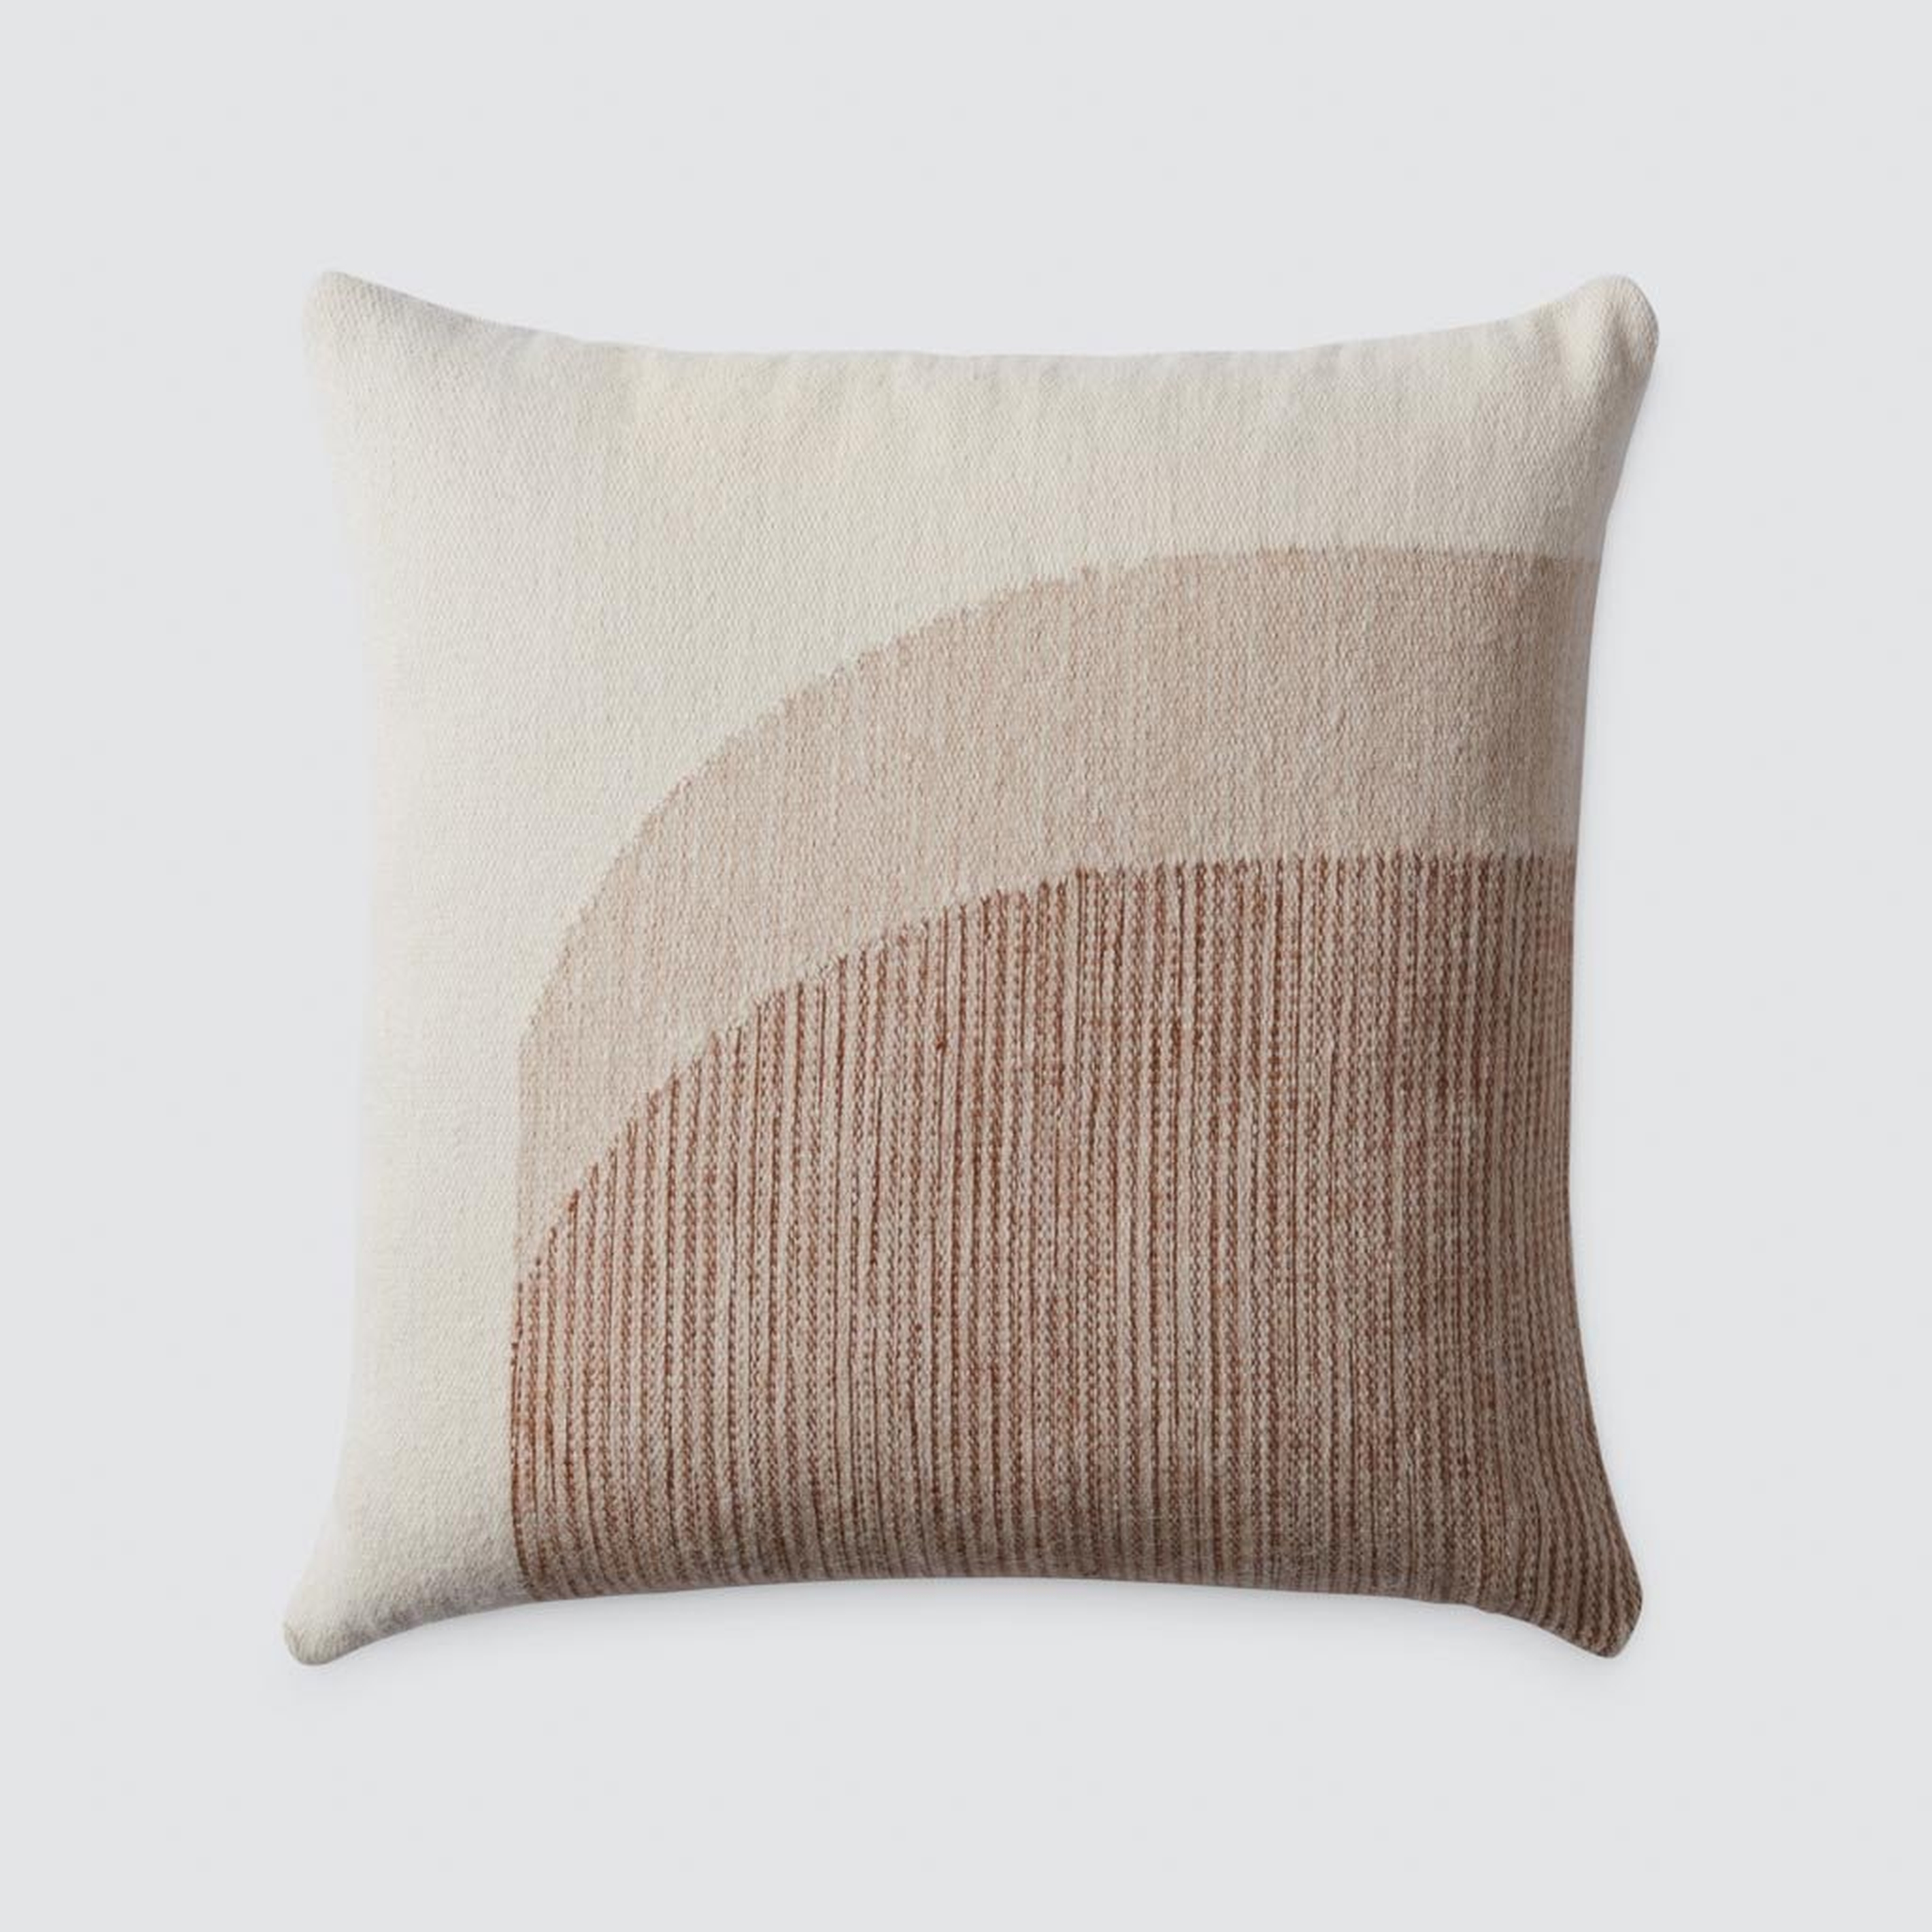 Ola Pillow By The Citizenry - The Citizenry